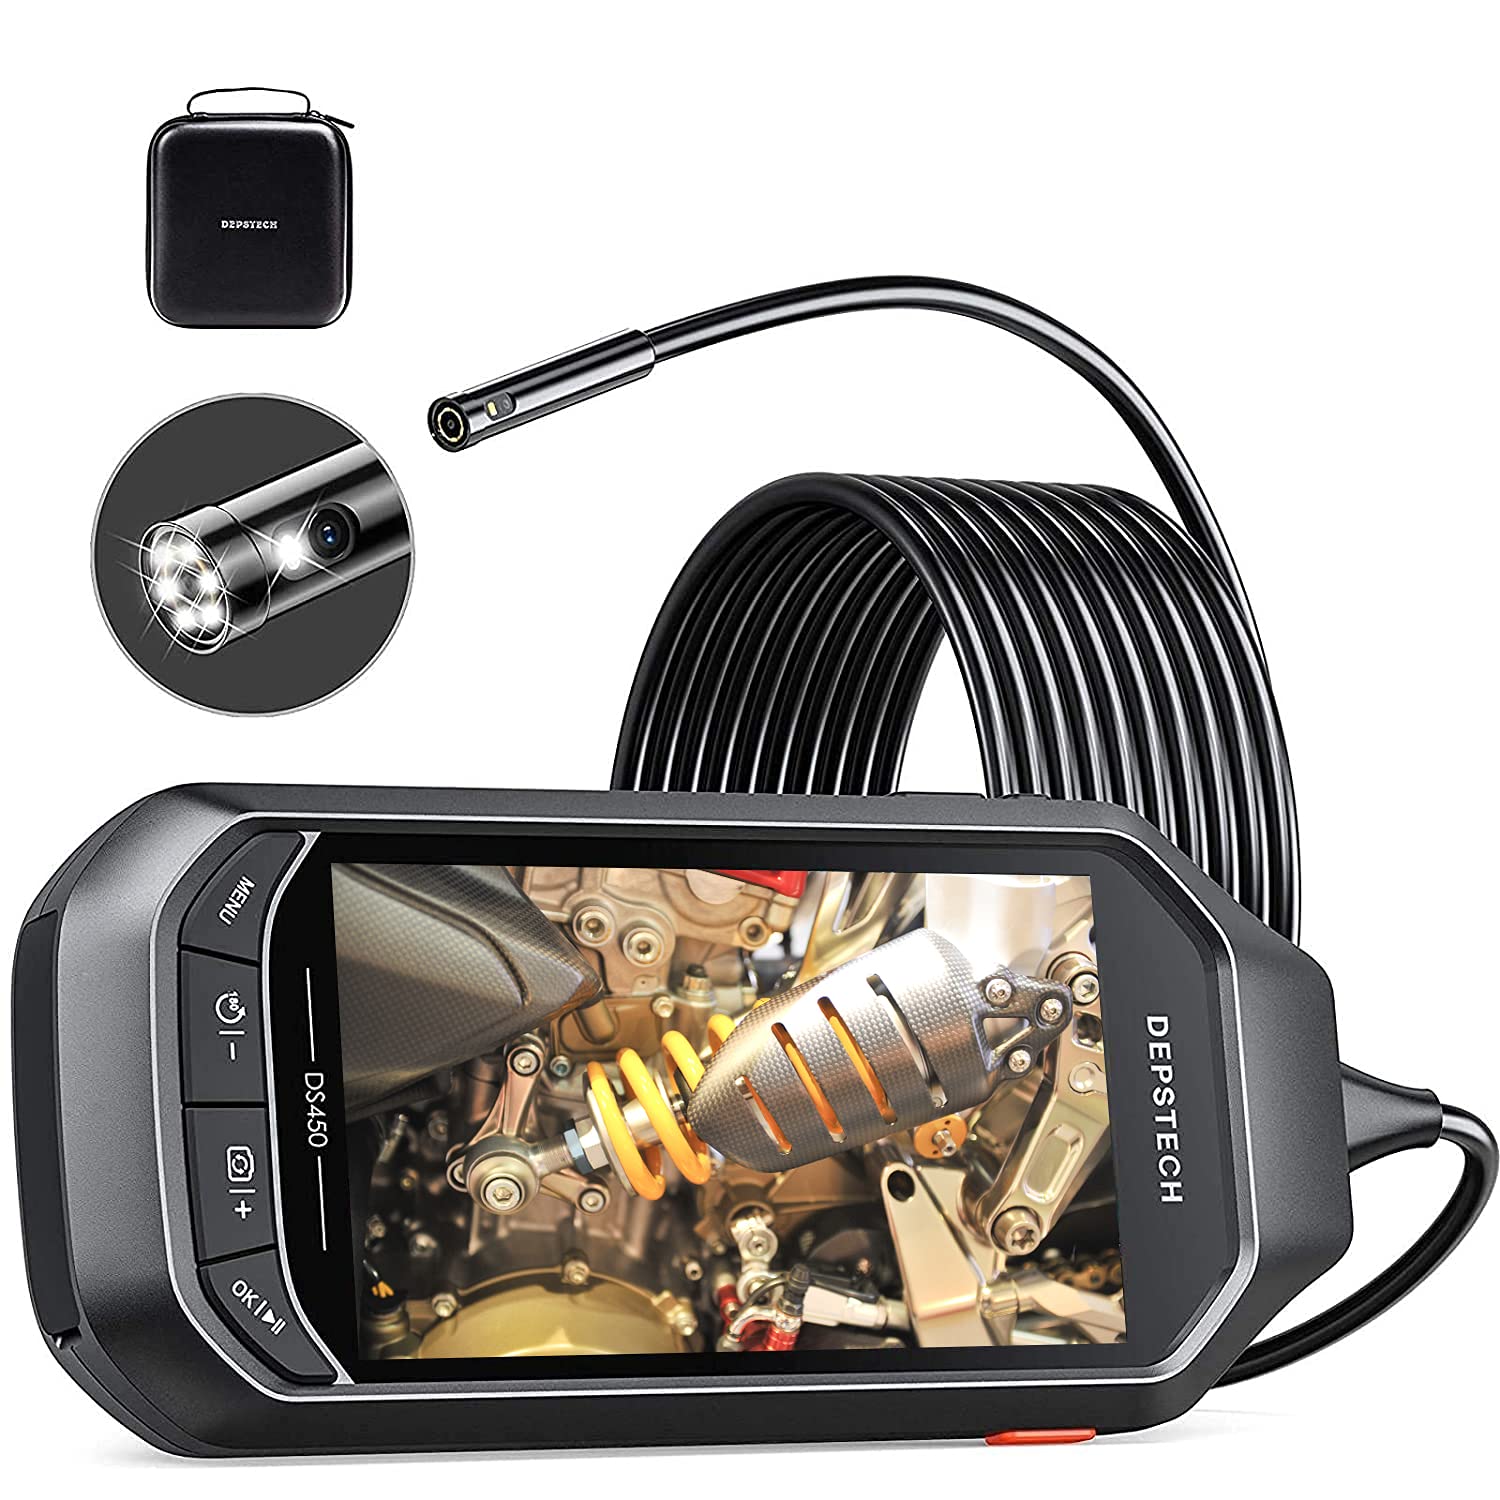 DEPSTECH DS450 Dual Lens Video Endoscope with 4.5